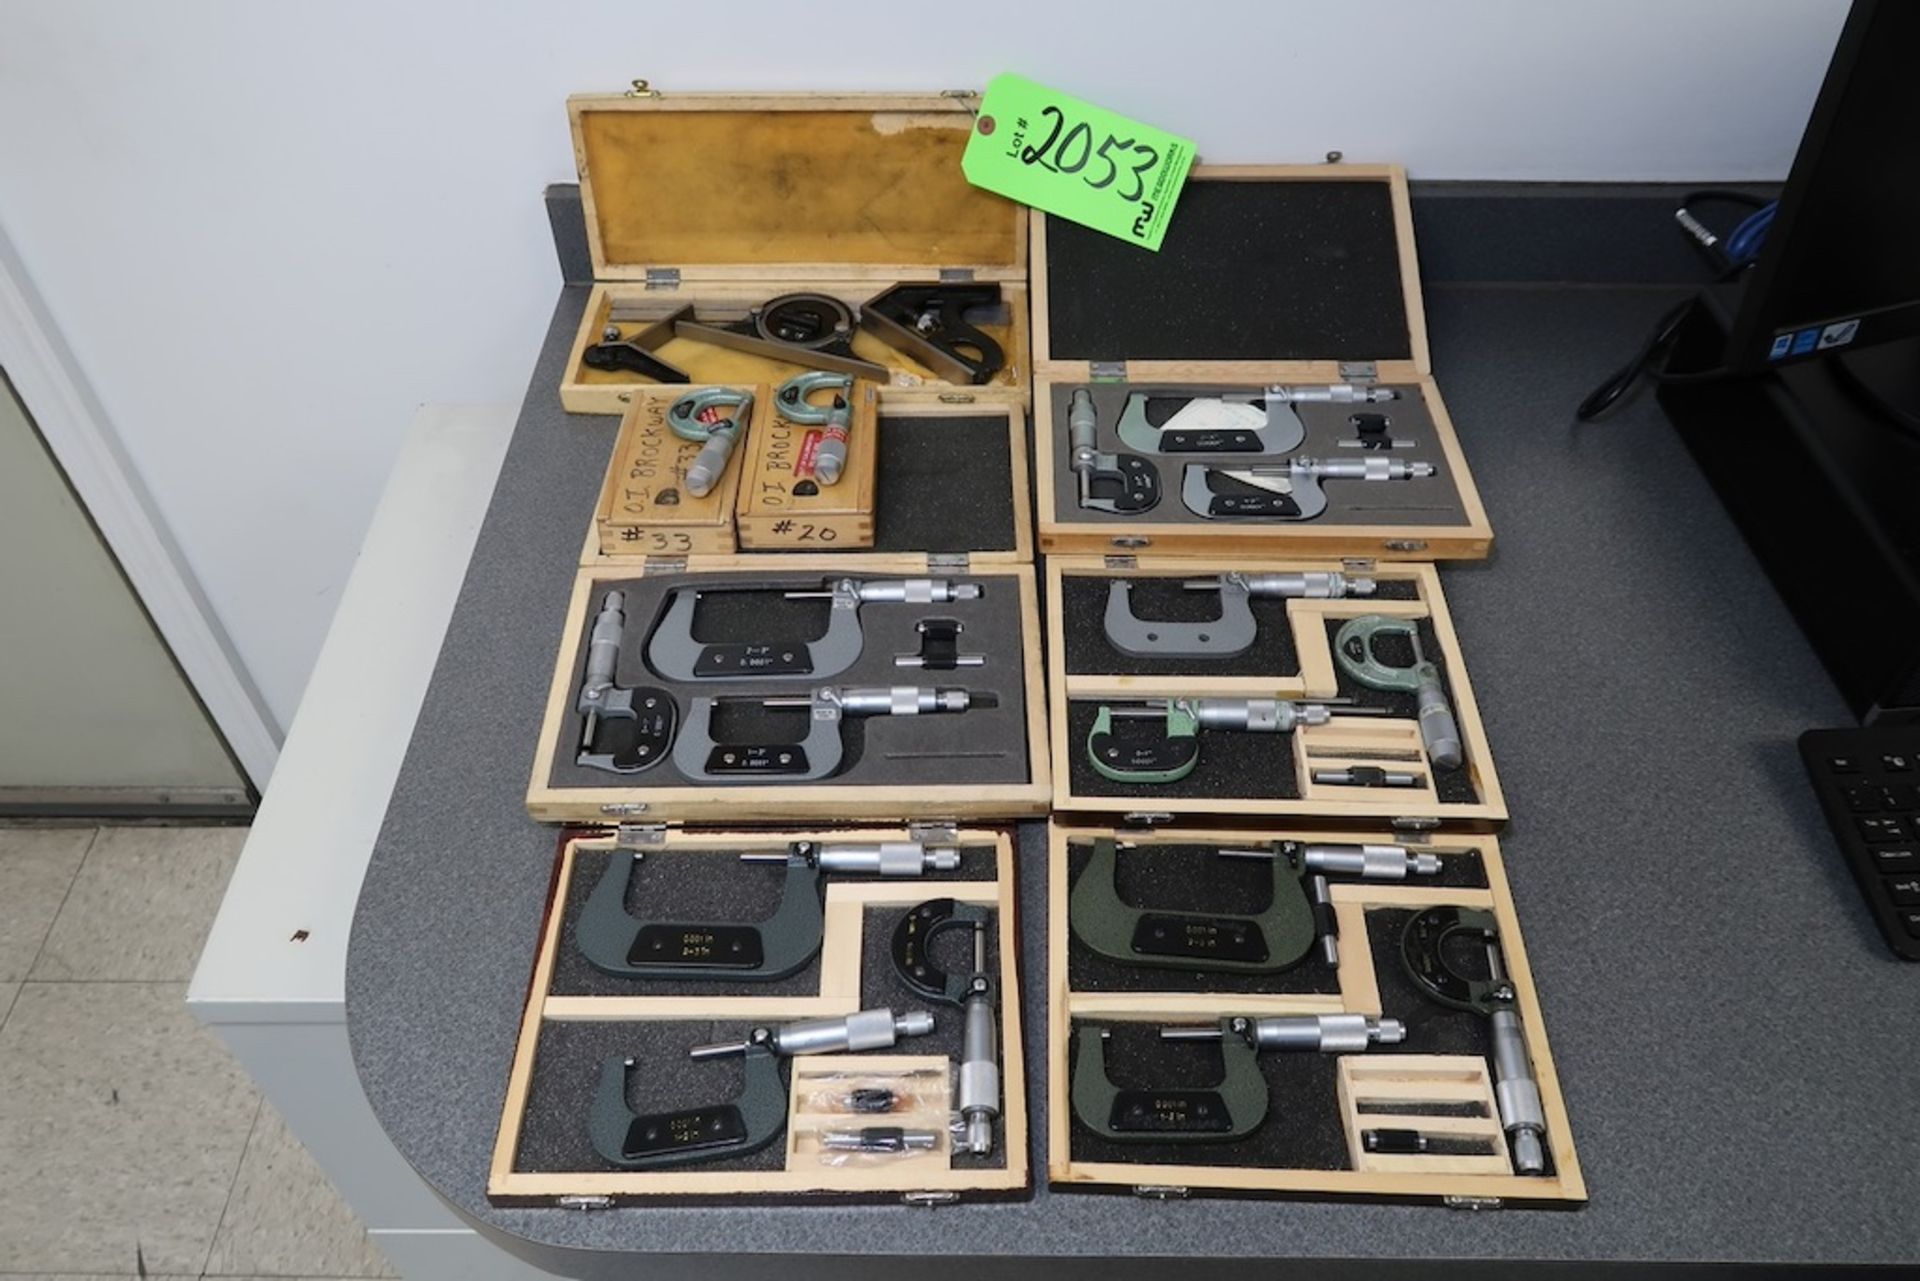 (17) OD Micrometers, 0-1" to 2-3" with Combination Square Set